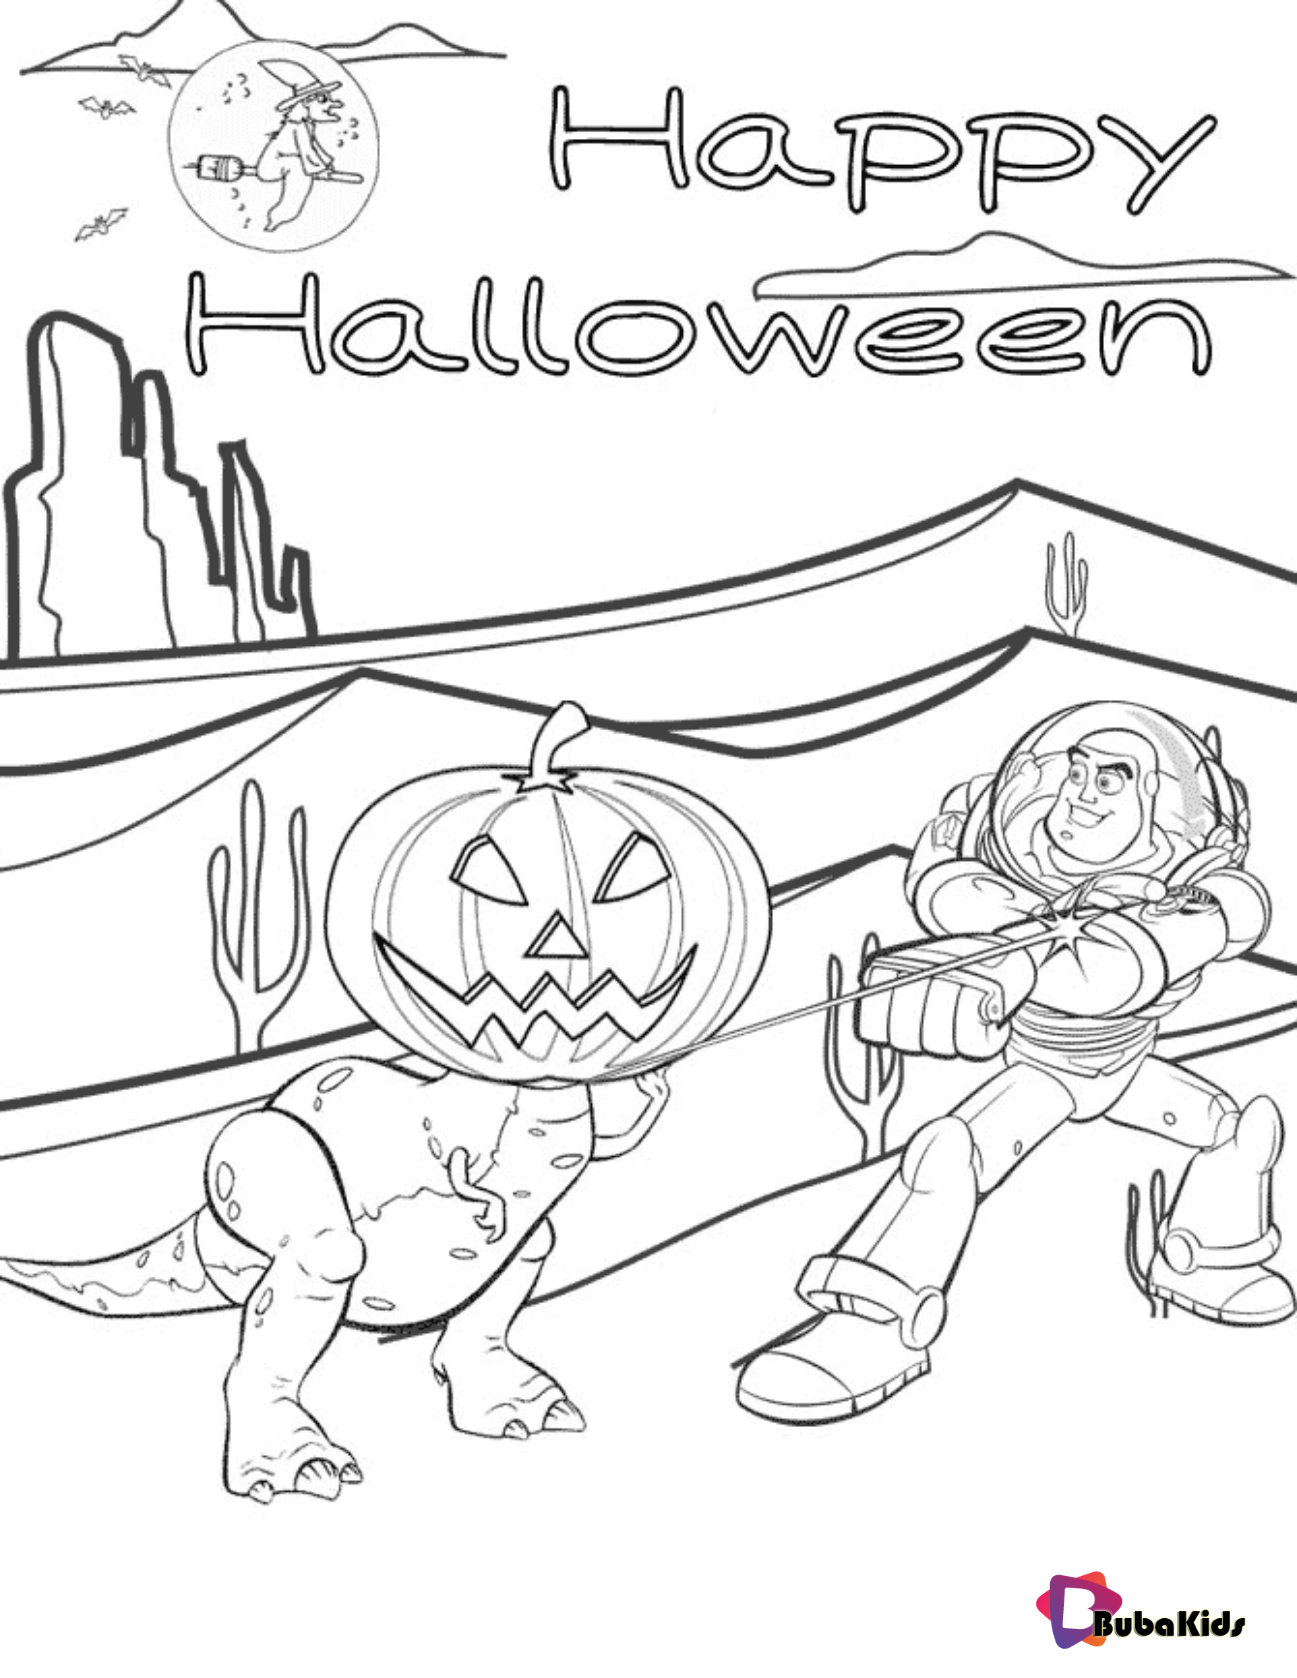 Toy Story 4 Rex and Buzz Lightyear Halloween coloring page on bubakids.com Wallpaper